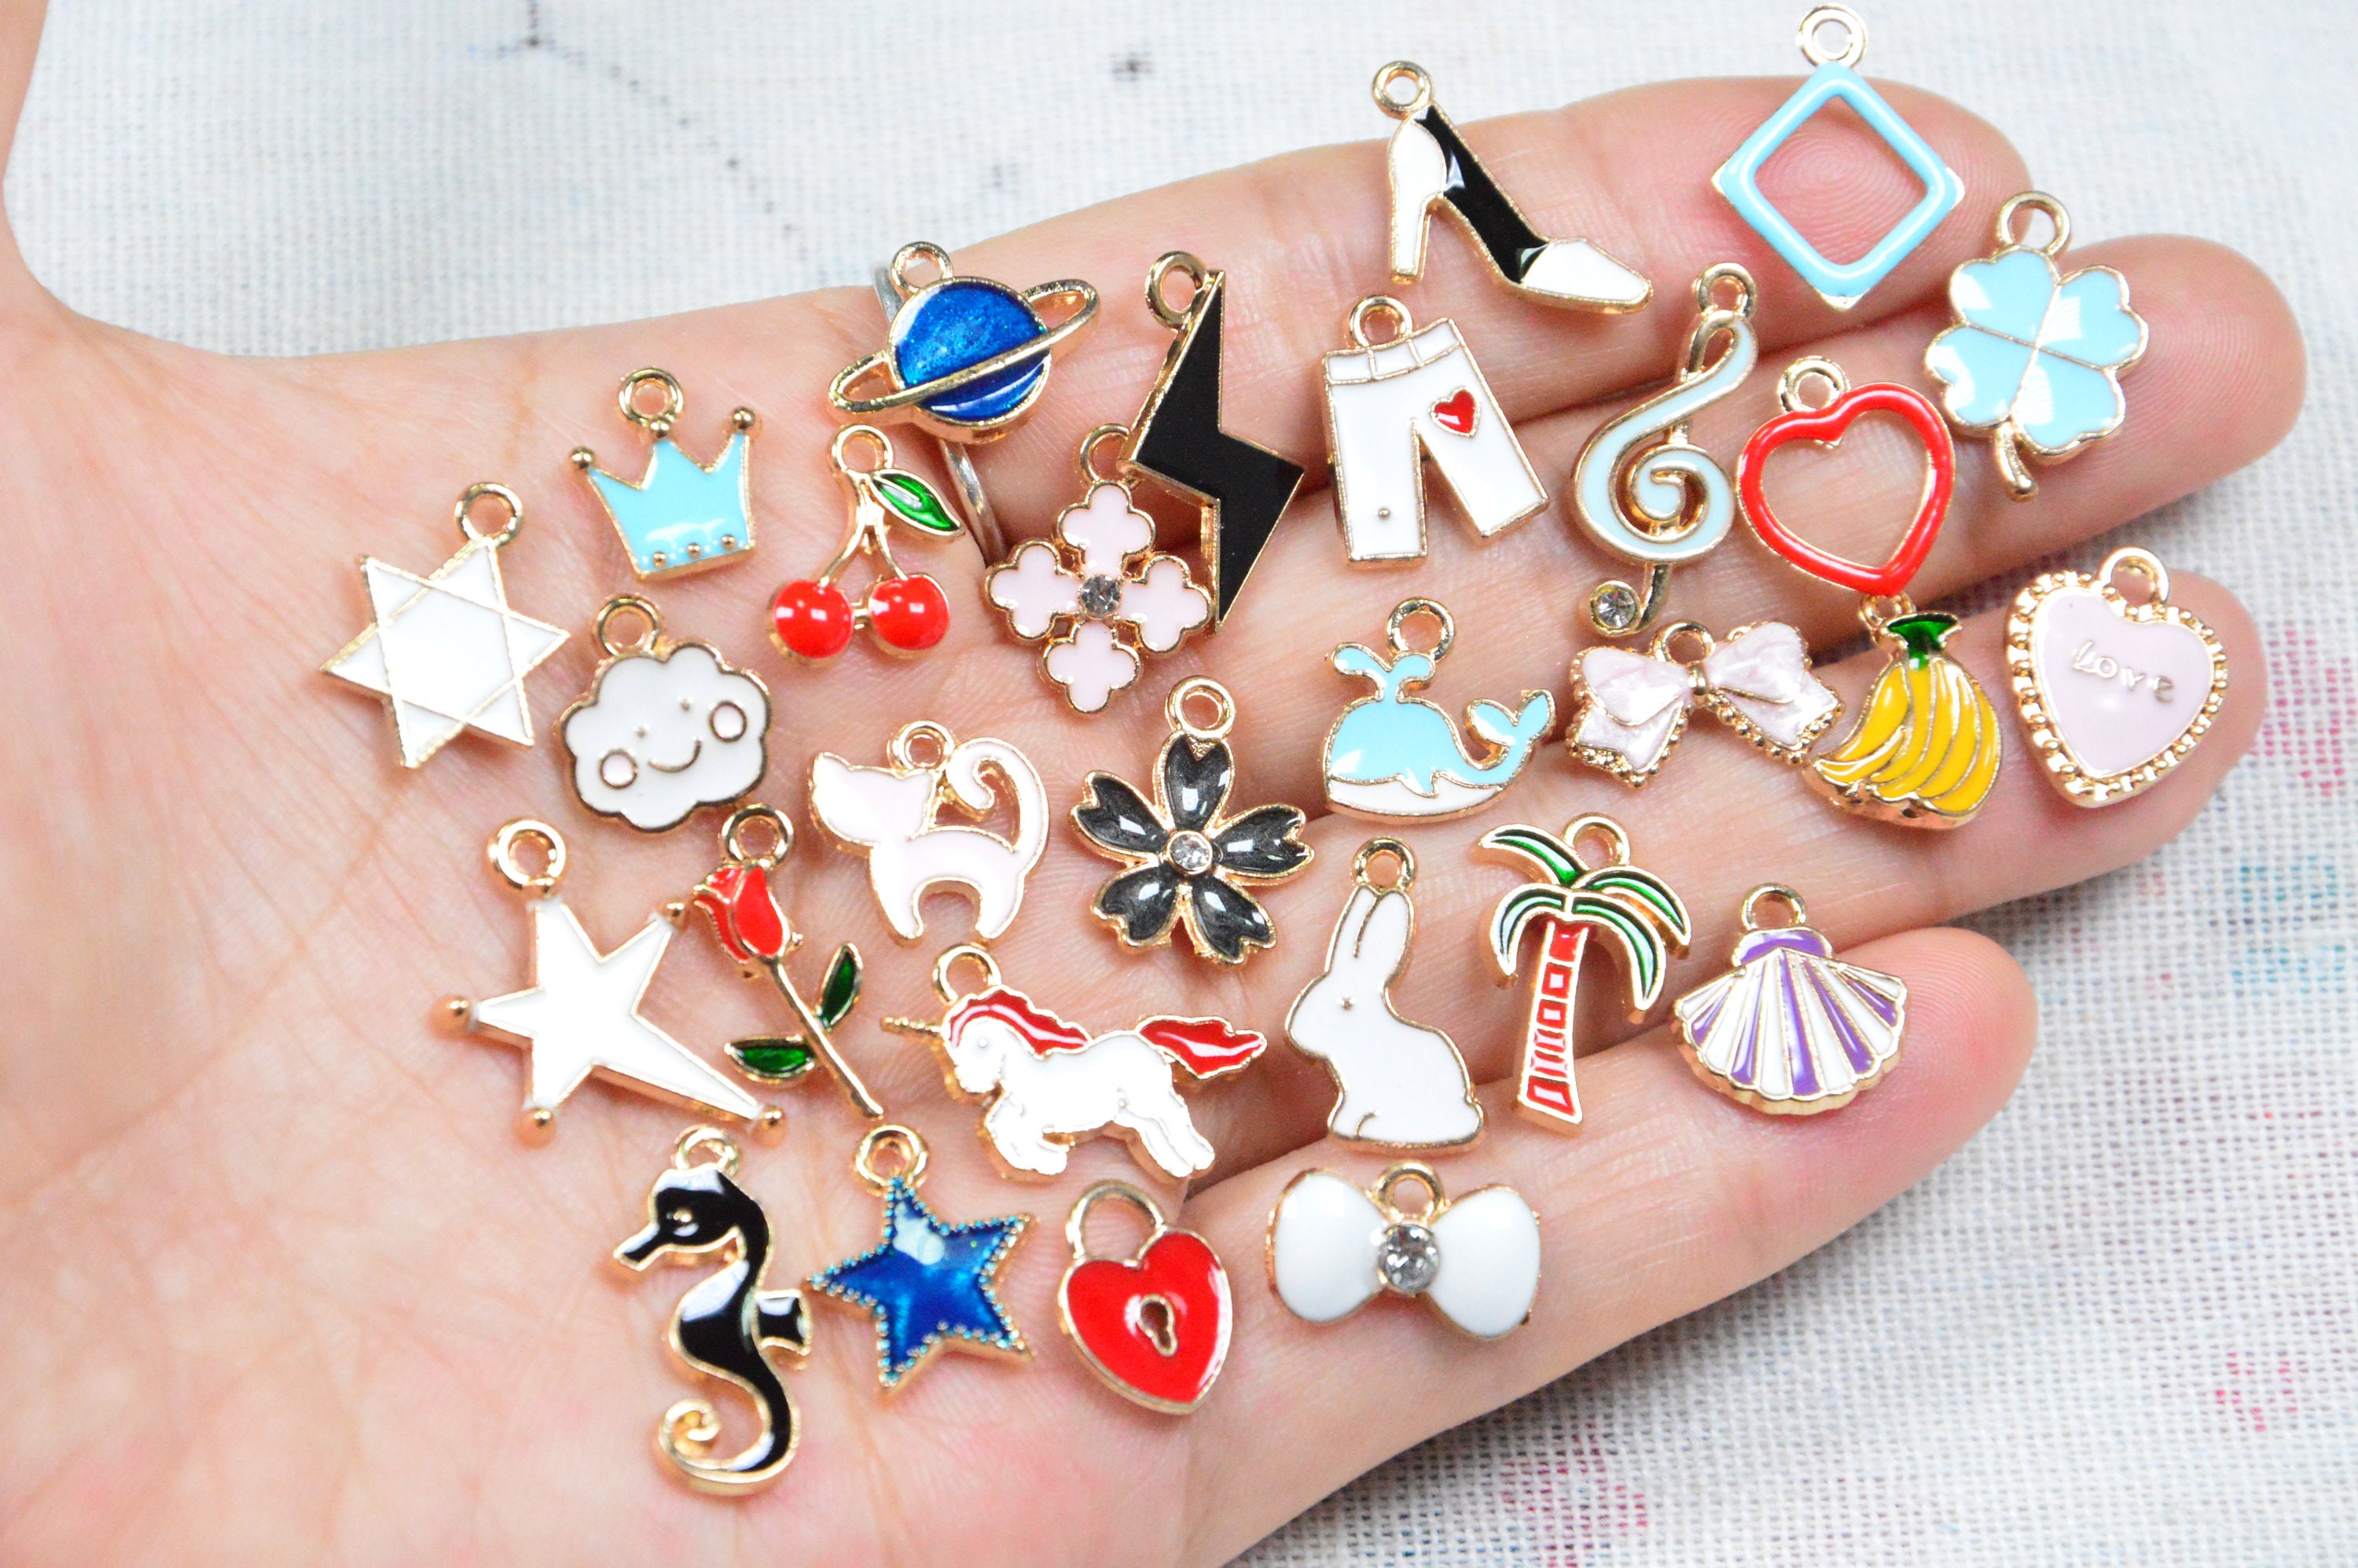 Bueautybox 31pcs Mixed Enamel Charms for Jewelry Making Pendants